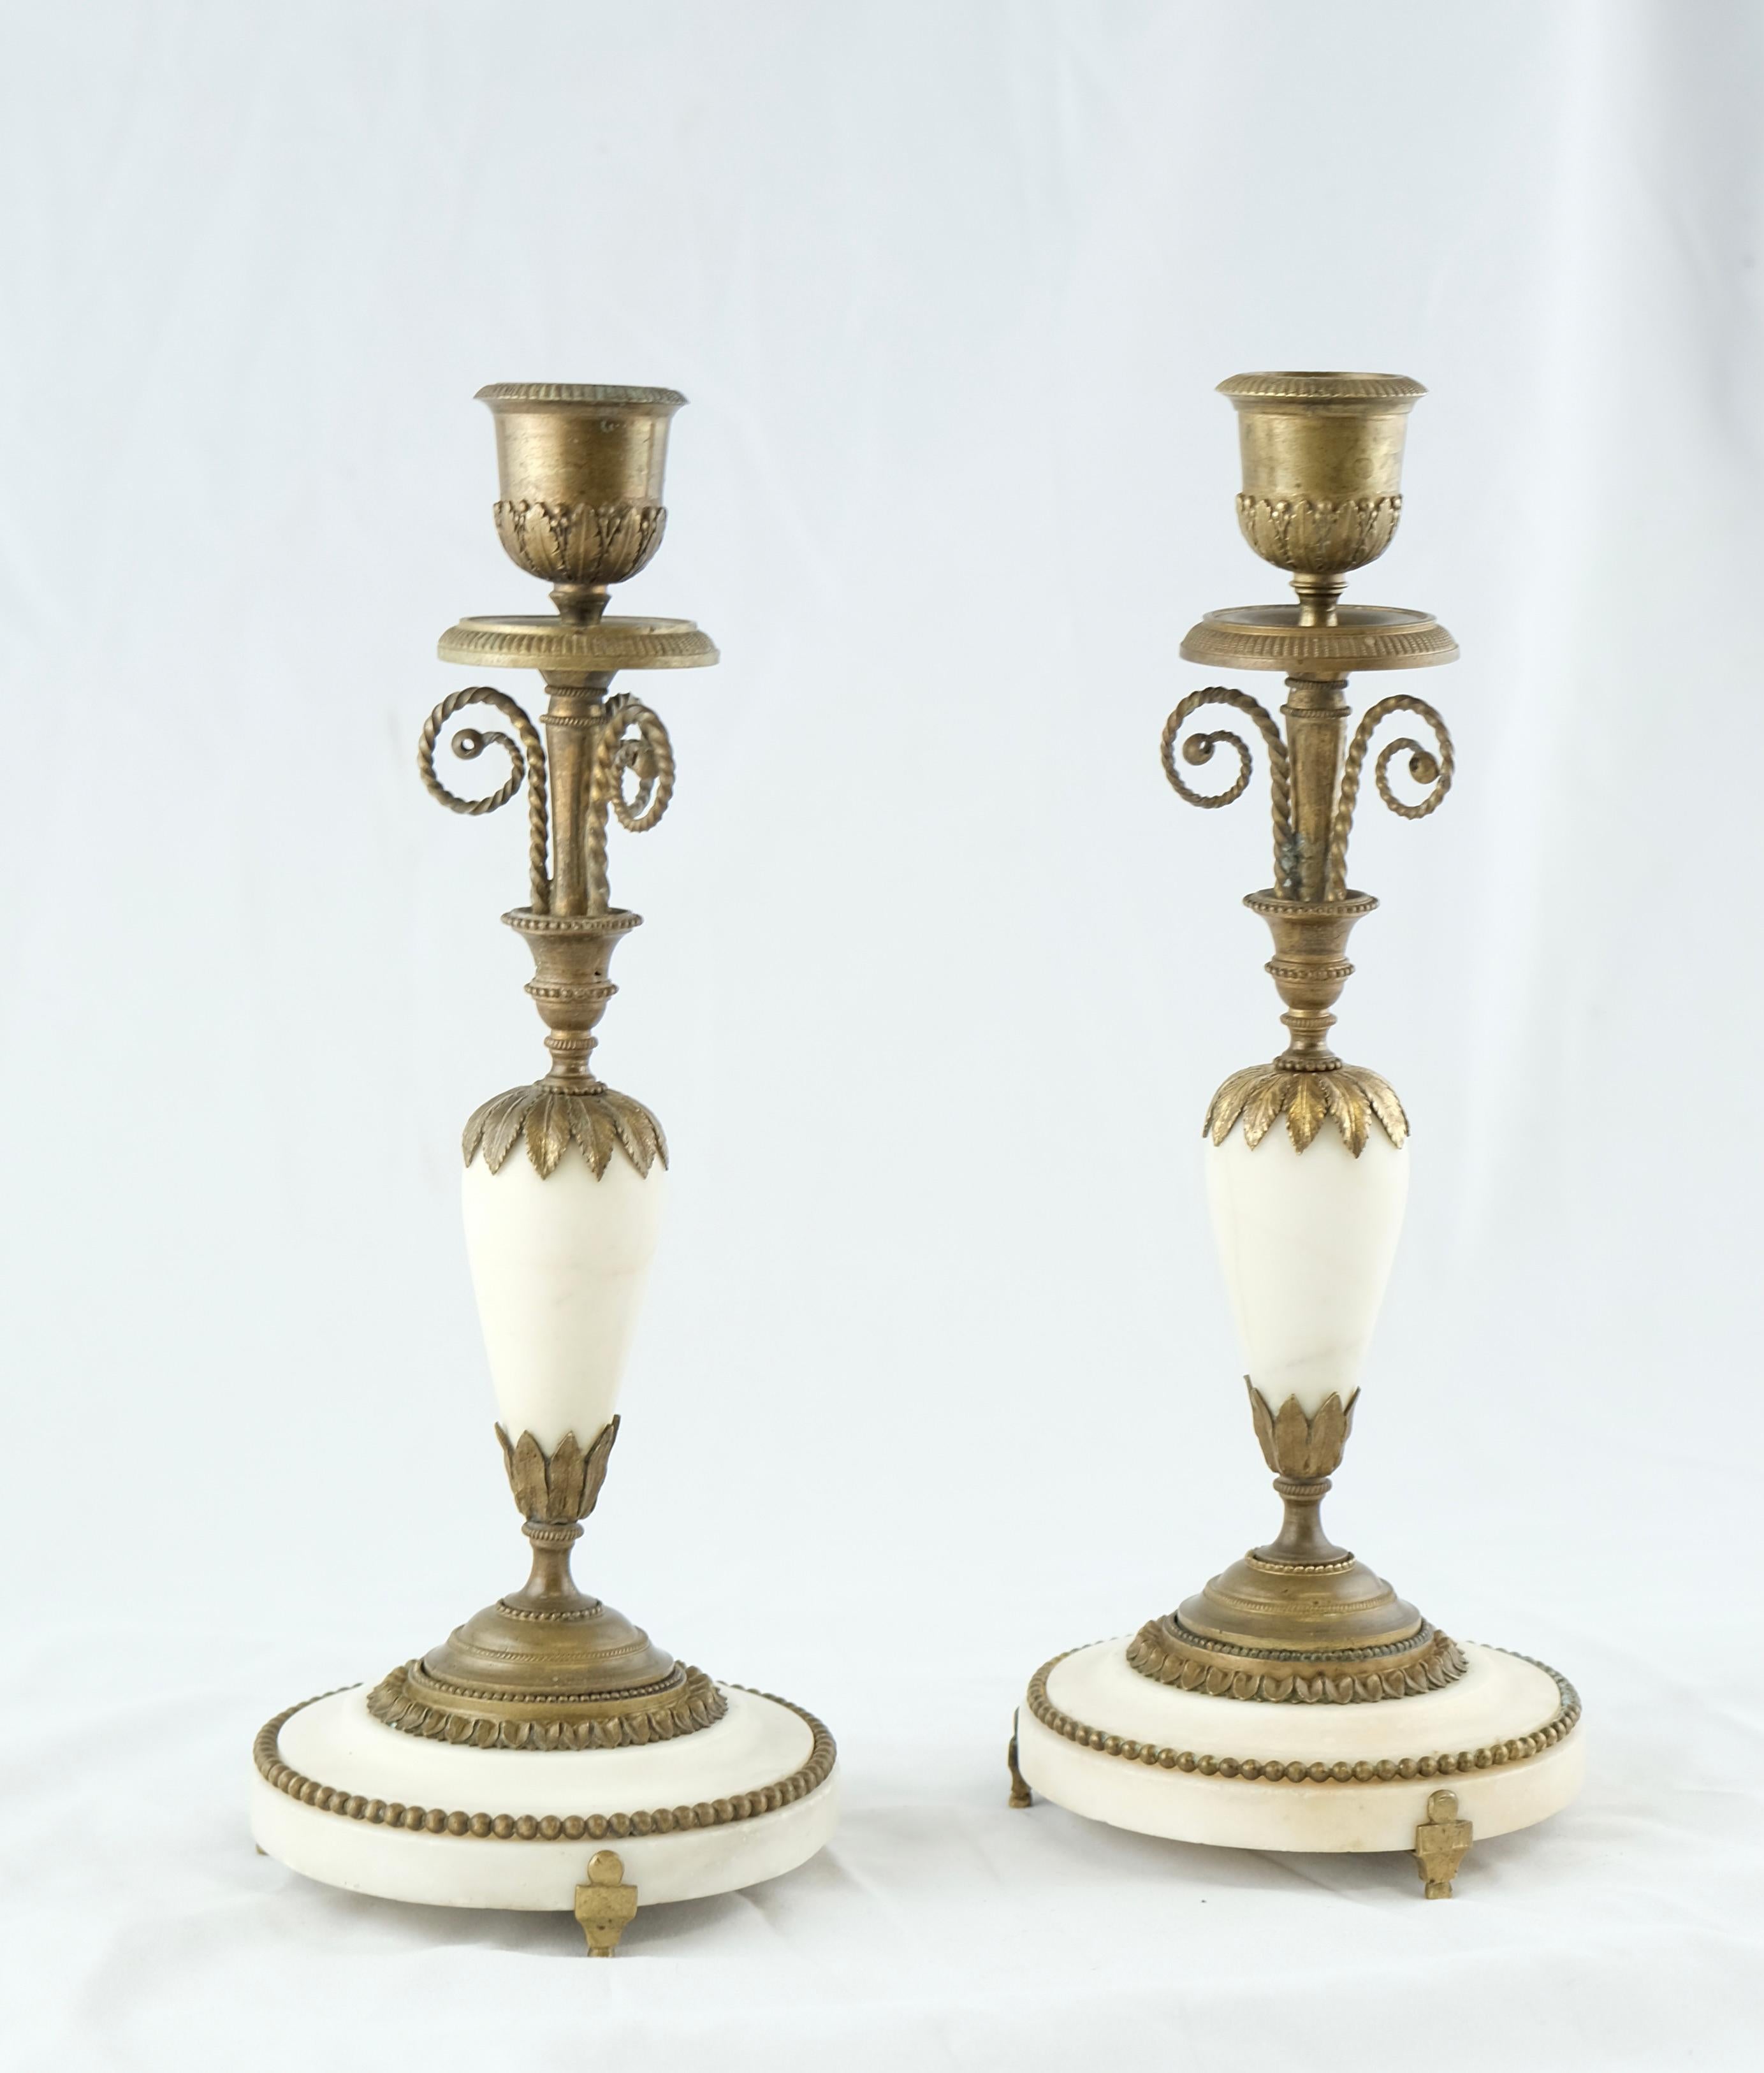 Pair of French Directoire Candlesticks Made in the 1790s For Sale 2